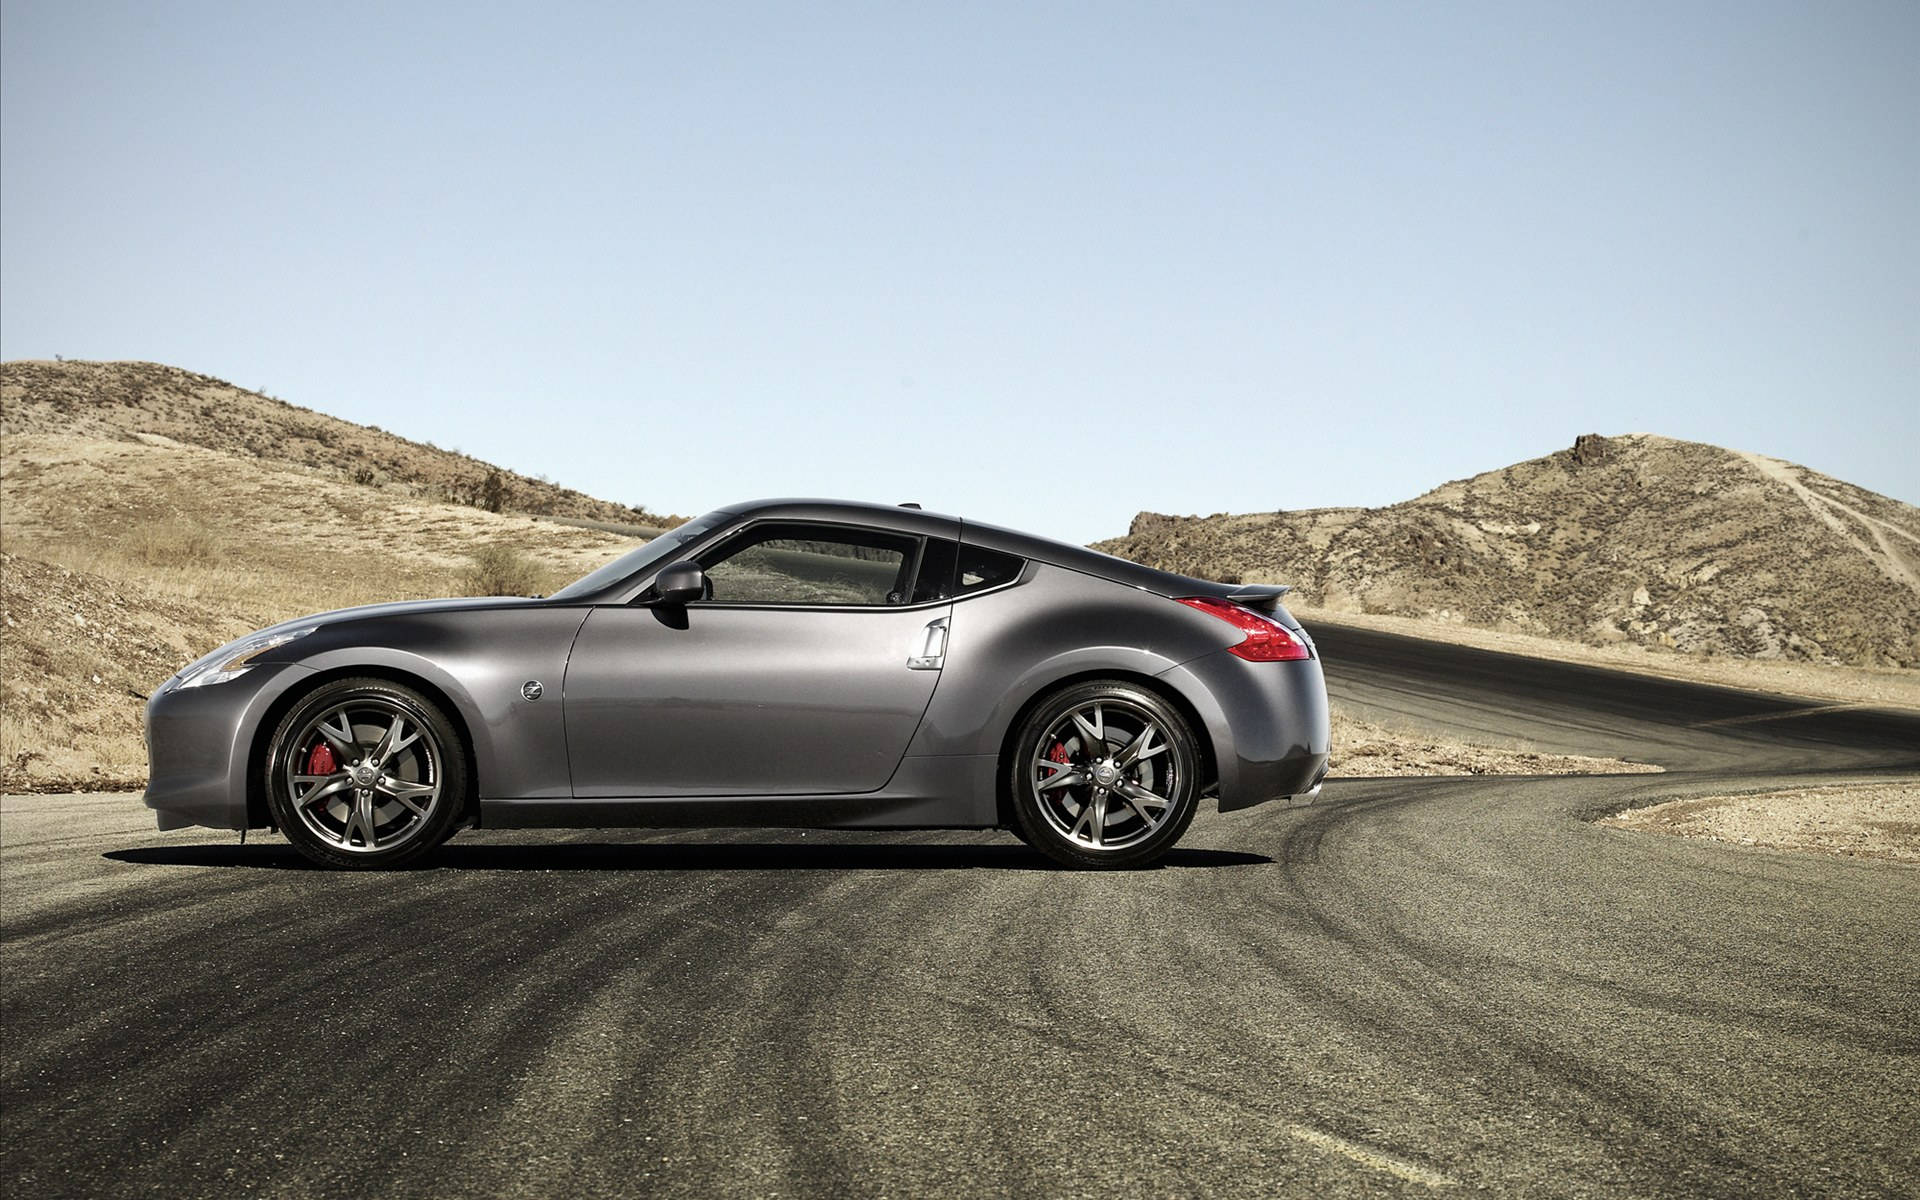 Go full speed ahead with the Nissan 370Z. Wallpaper